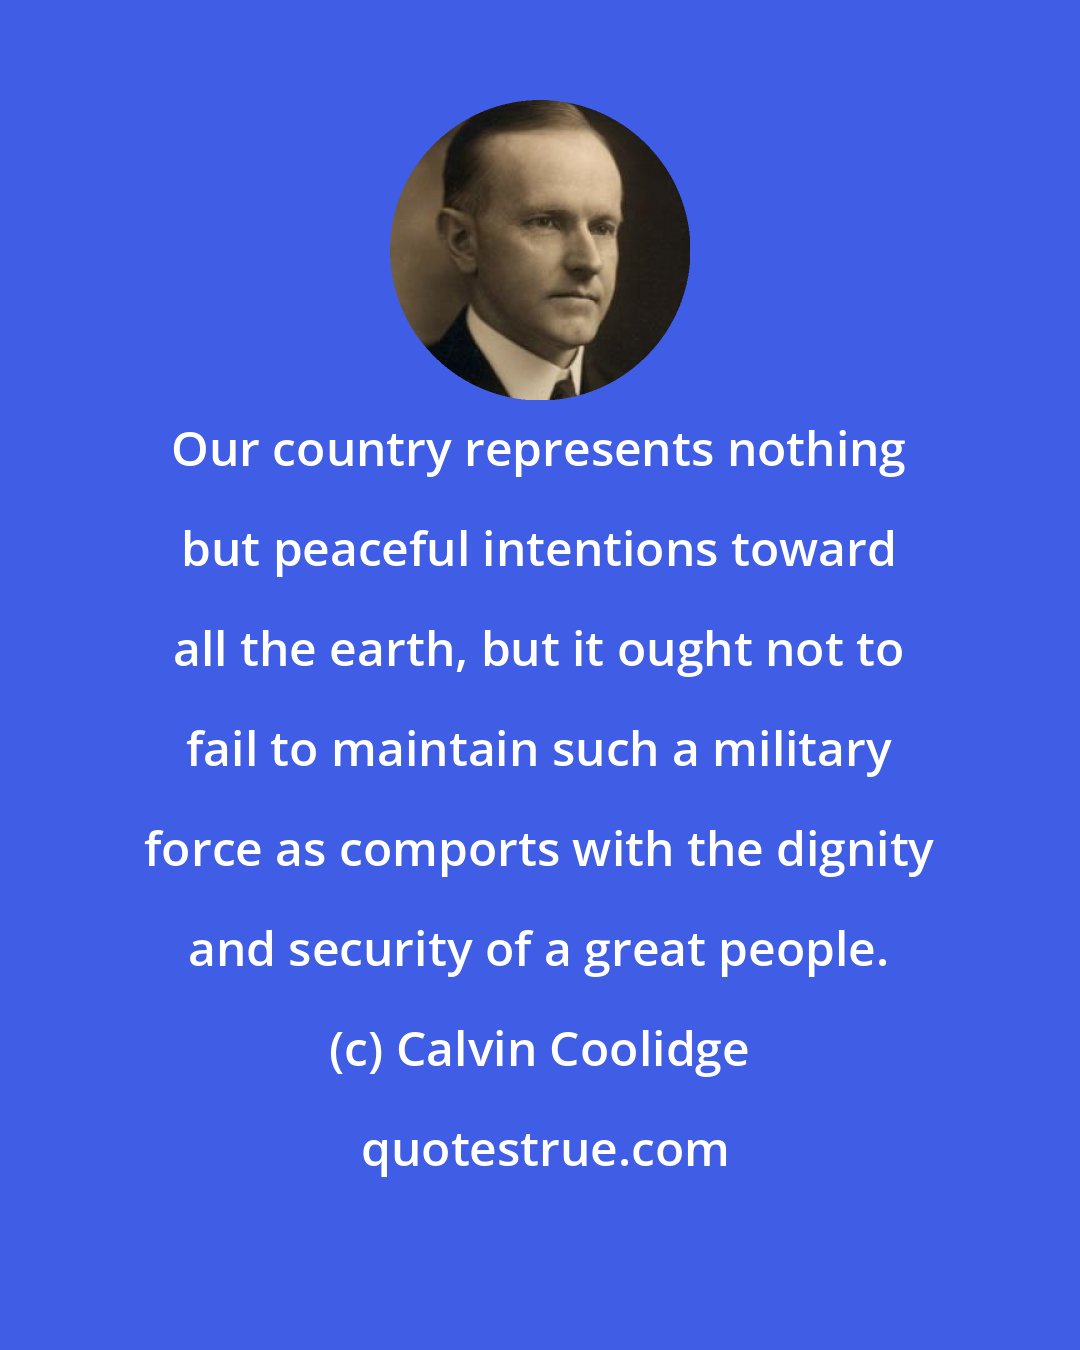 Calvin Coolidge: Our country represents nothing but peaceful intentions toward all the earth, but it ought not to fail to maintain such a military force as comports with the dignity and security of a great people.